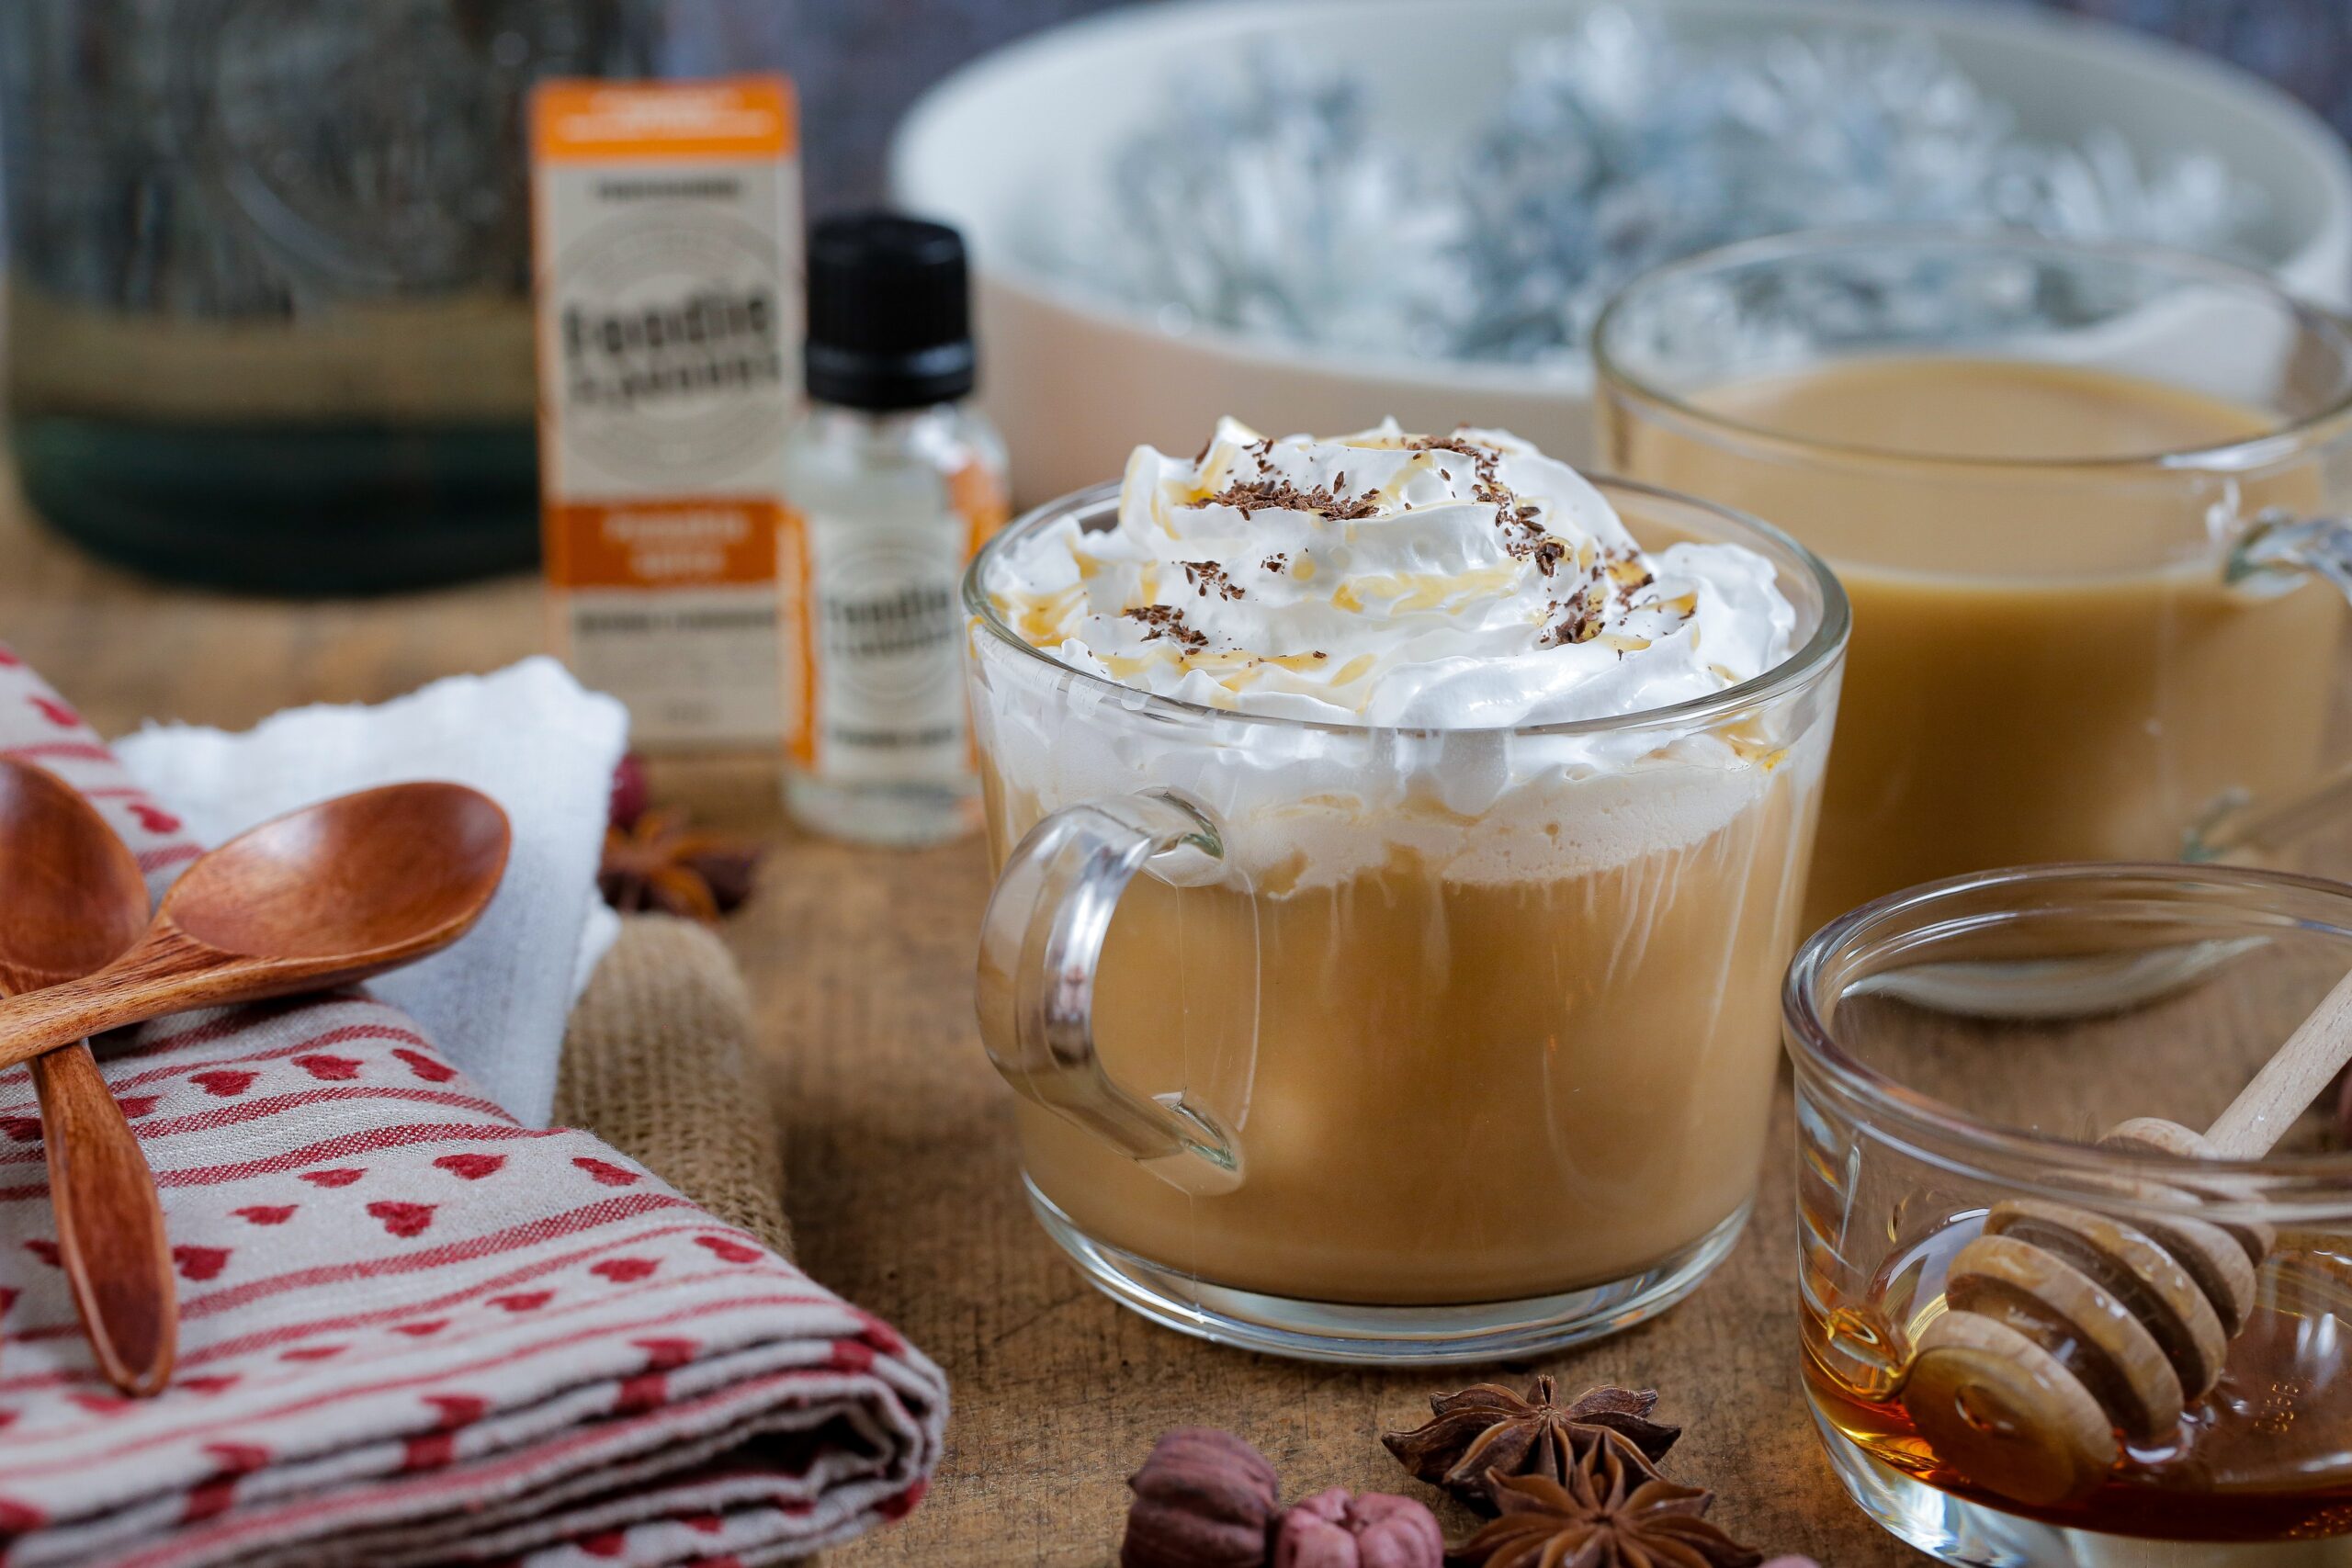 Adding pumpkin to any alcoholic drink makes for perfect Thanksgiving cocktails. The Pumpkin spice white Russian is so sweet that you could drink it for dessert. Pictured: A pumpkin spice latte.